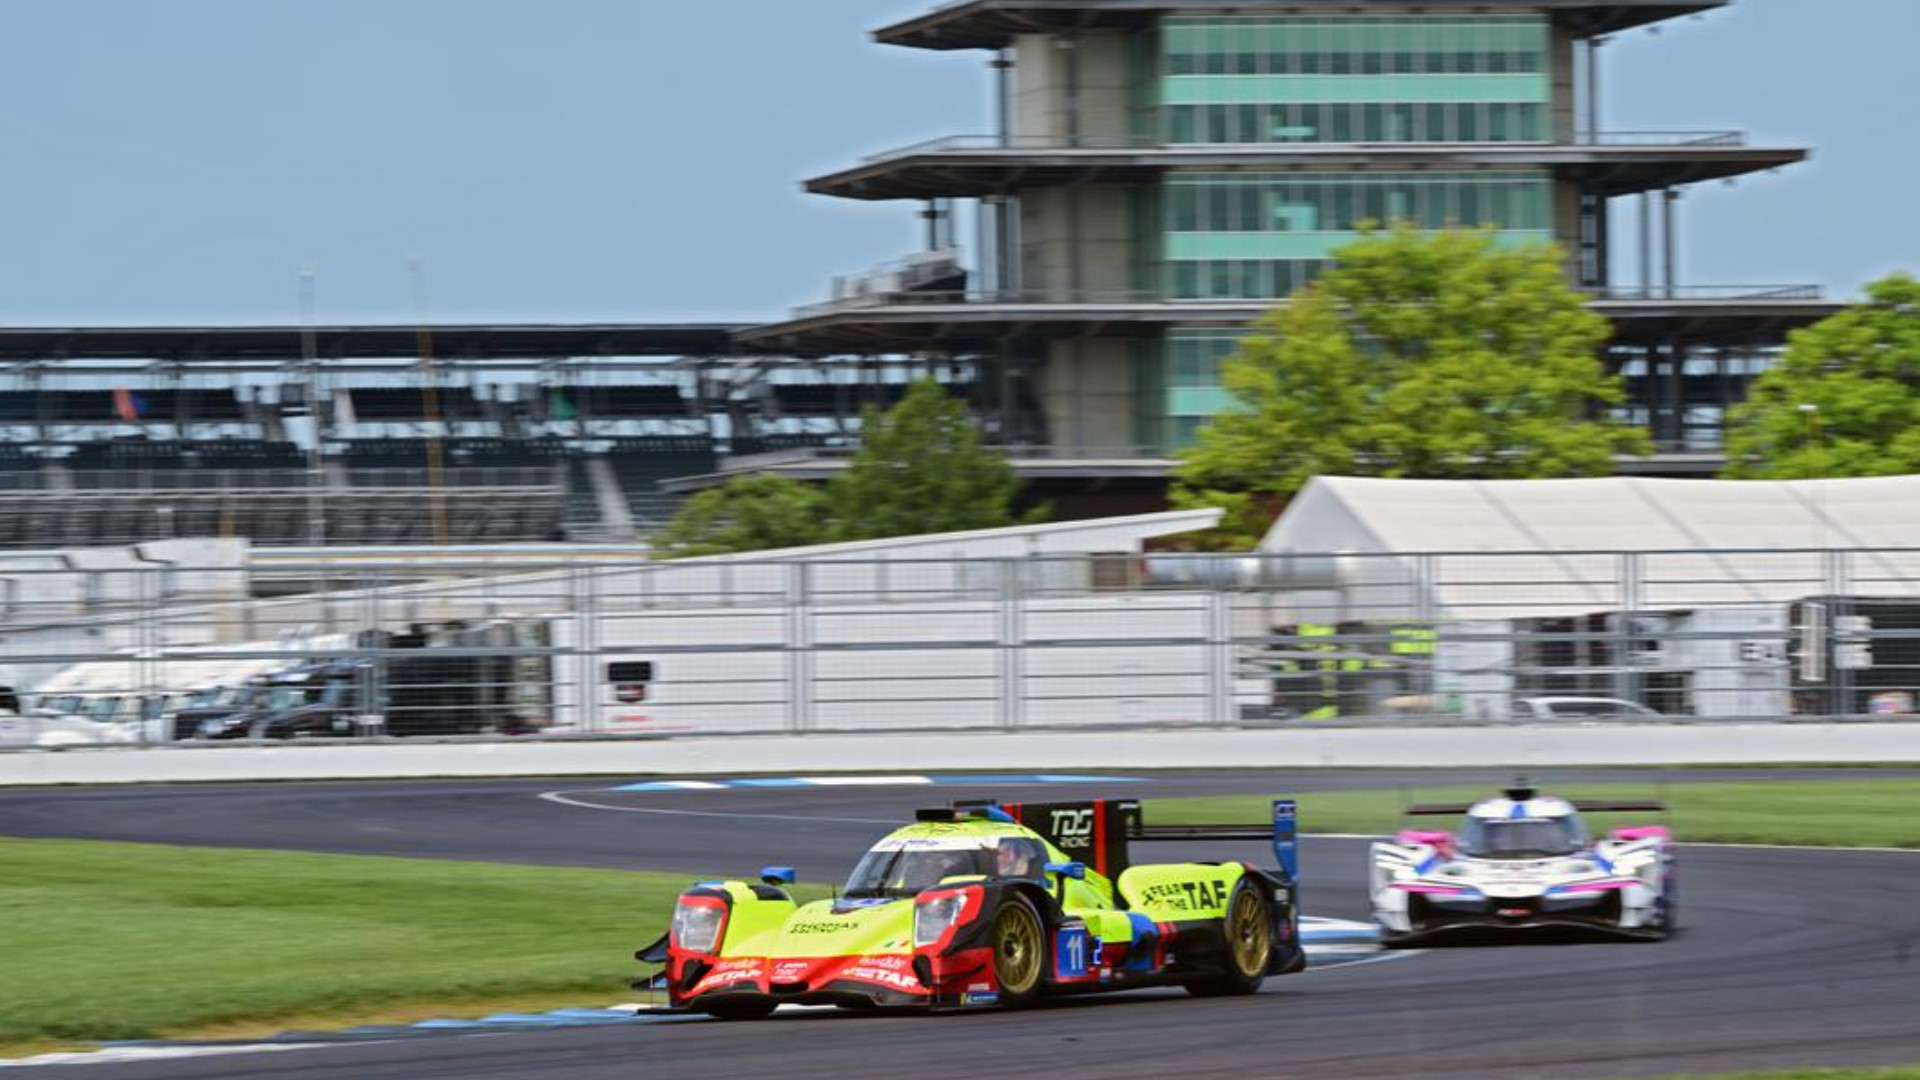 More than 30 IMSA sports cars will be on display ahead of the Battle on the Bricks at the Indianapolis Motor Speedway this weekend.